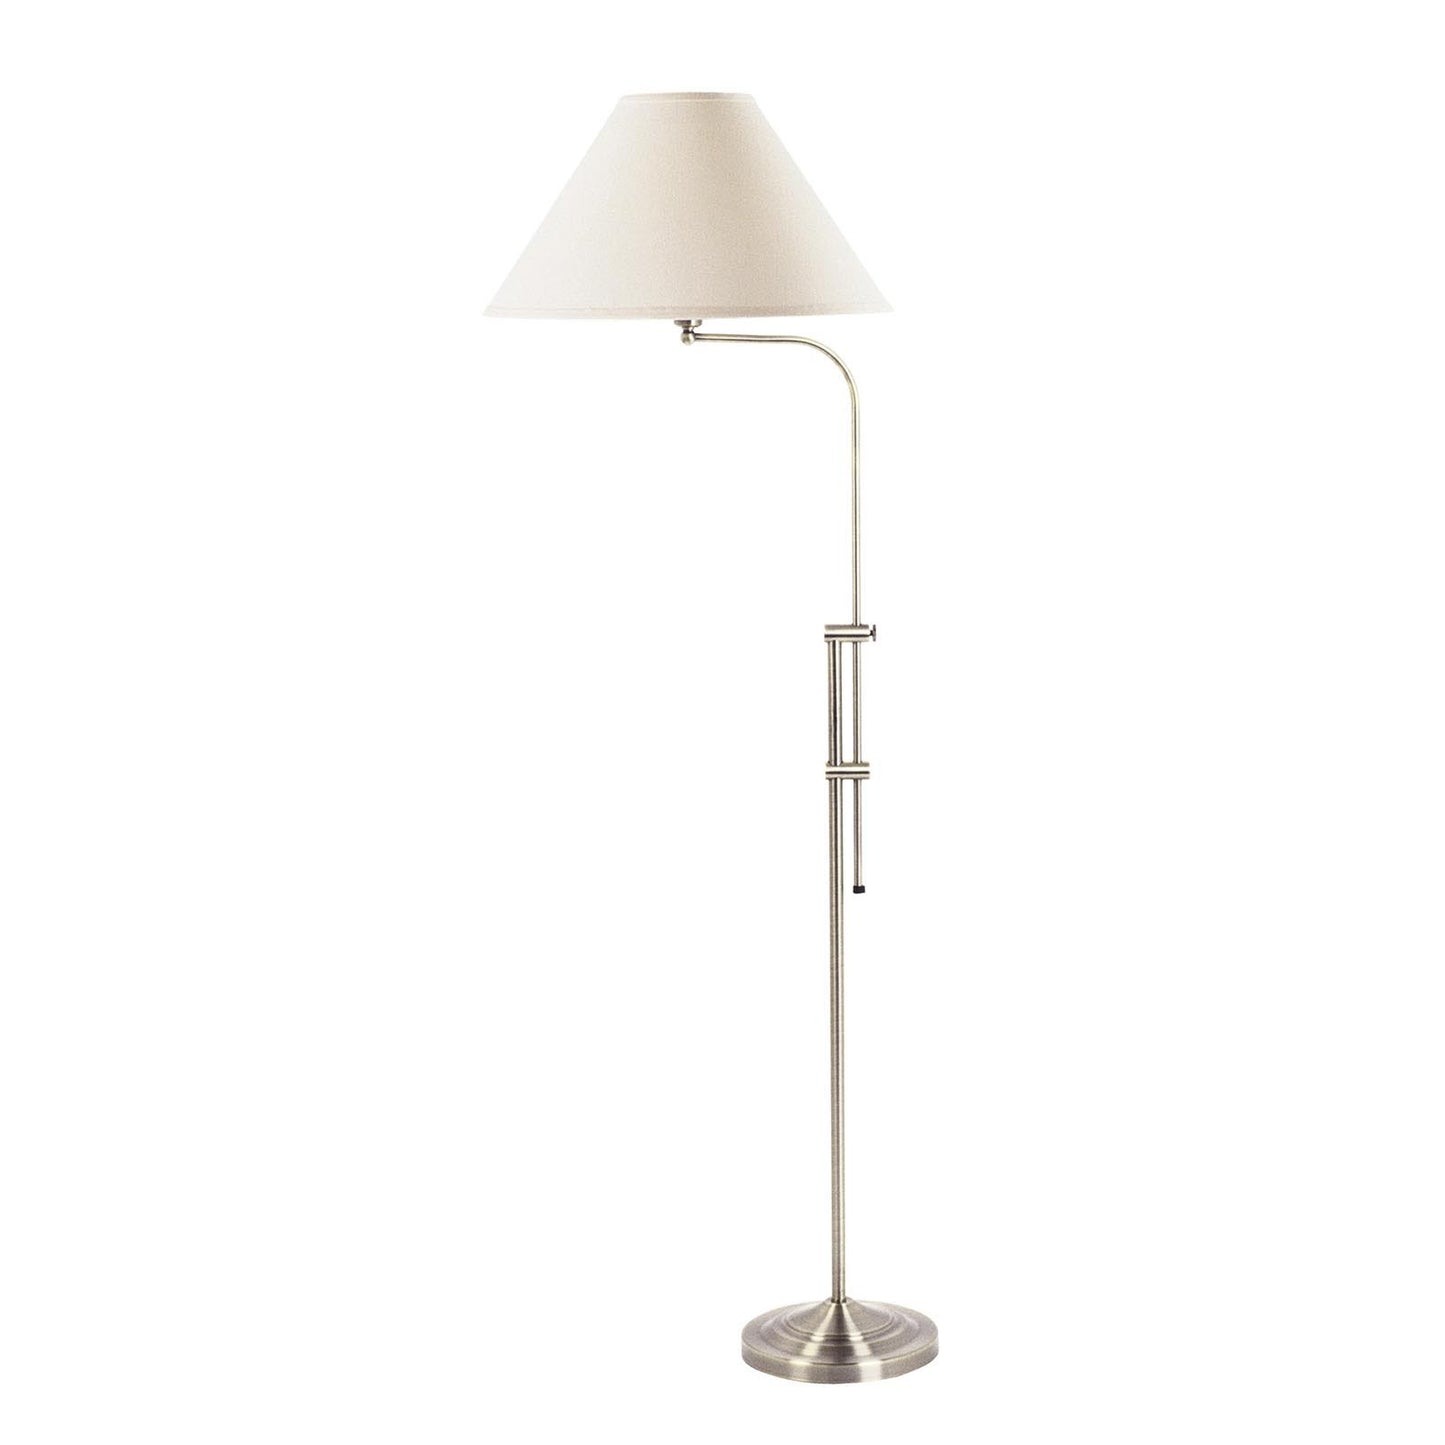 68" Nickel Adjustable Traditional Shaped Floor Lamp With White Empire Shade